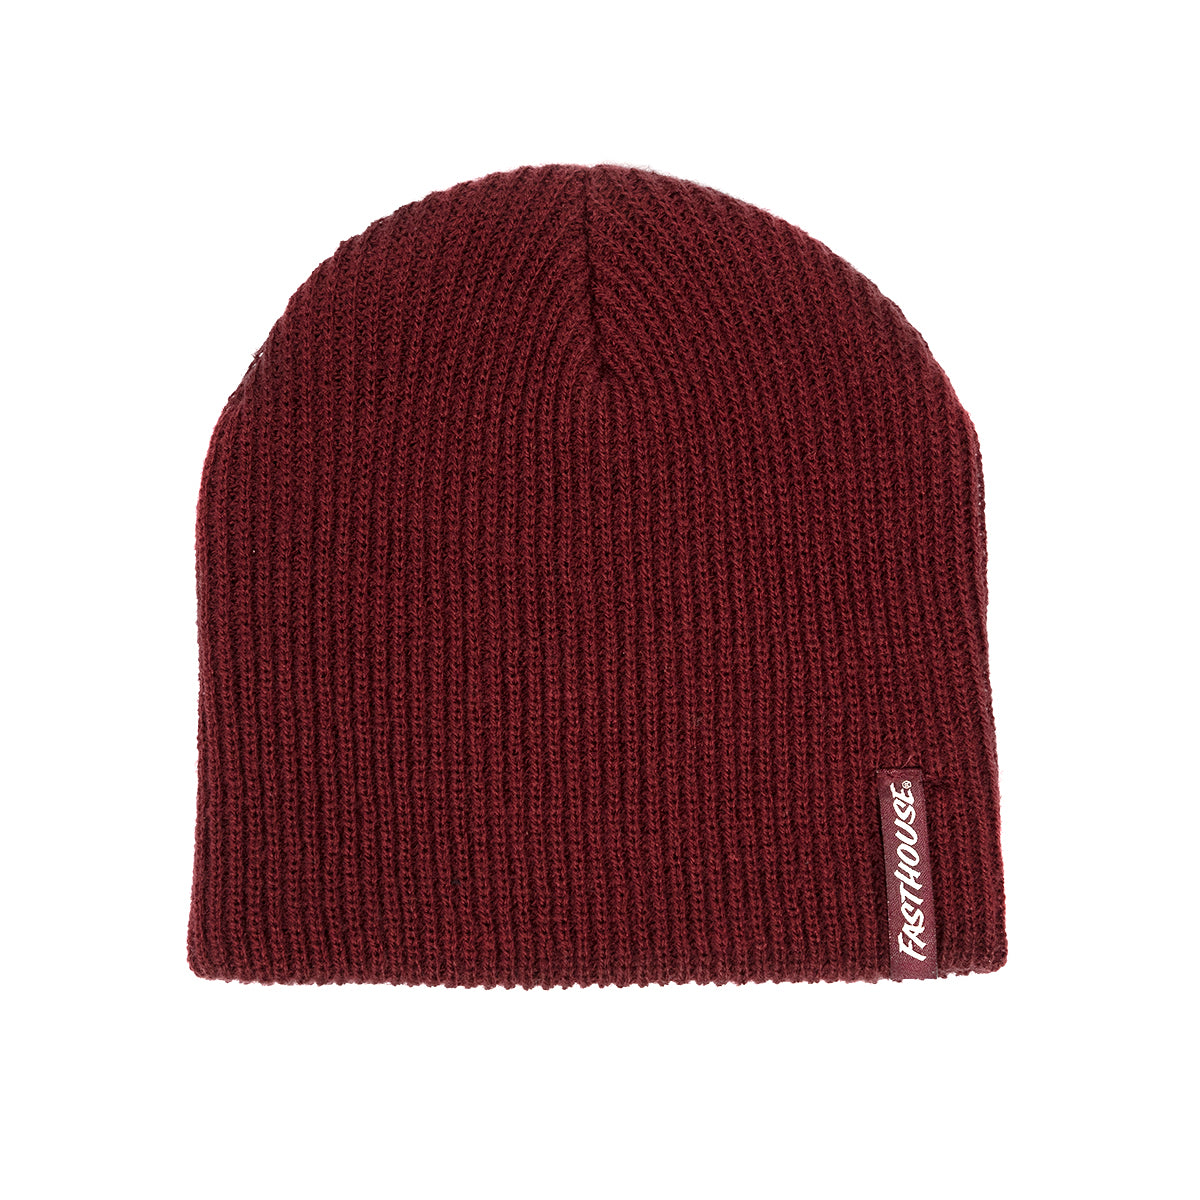 Righteous Youth Beanie - Maroon